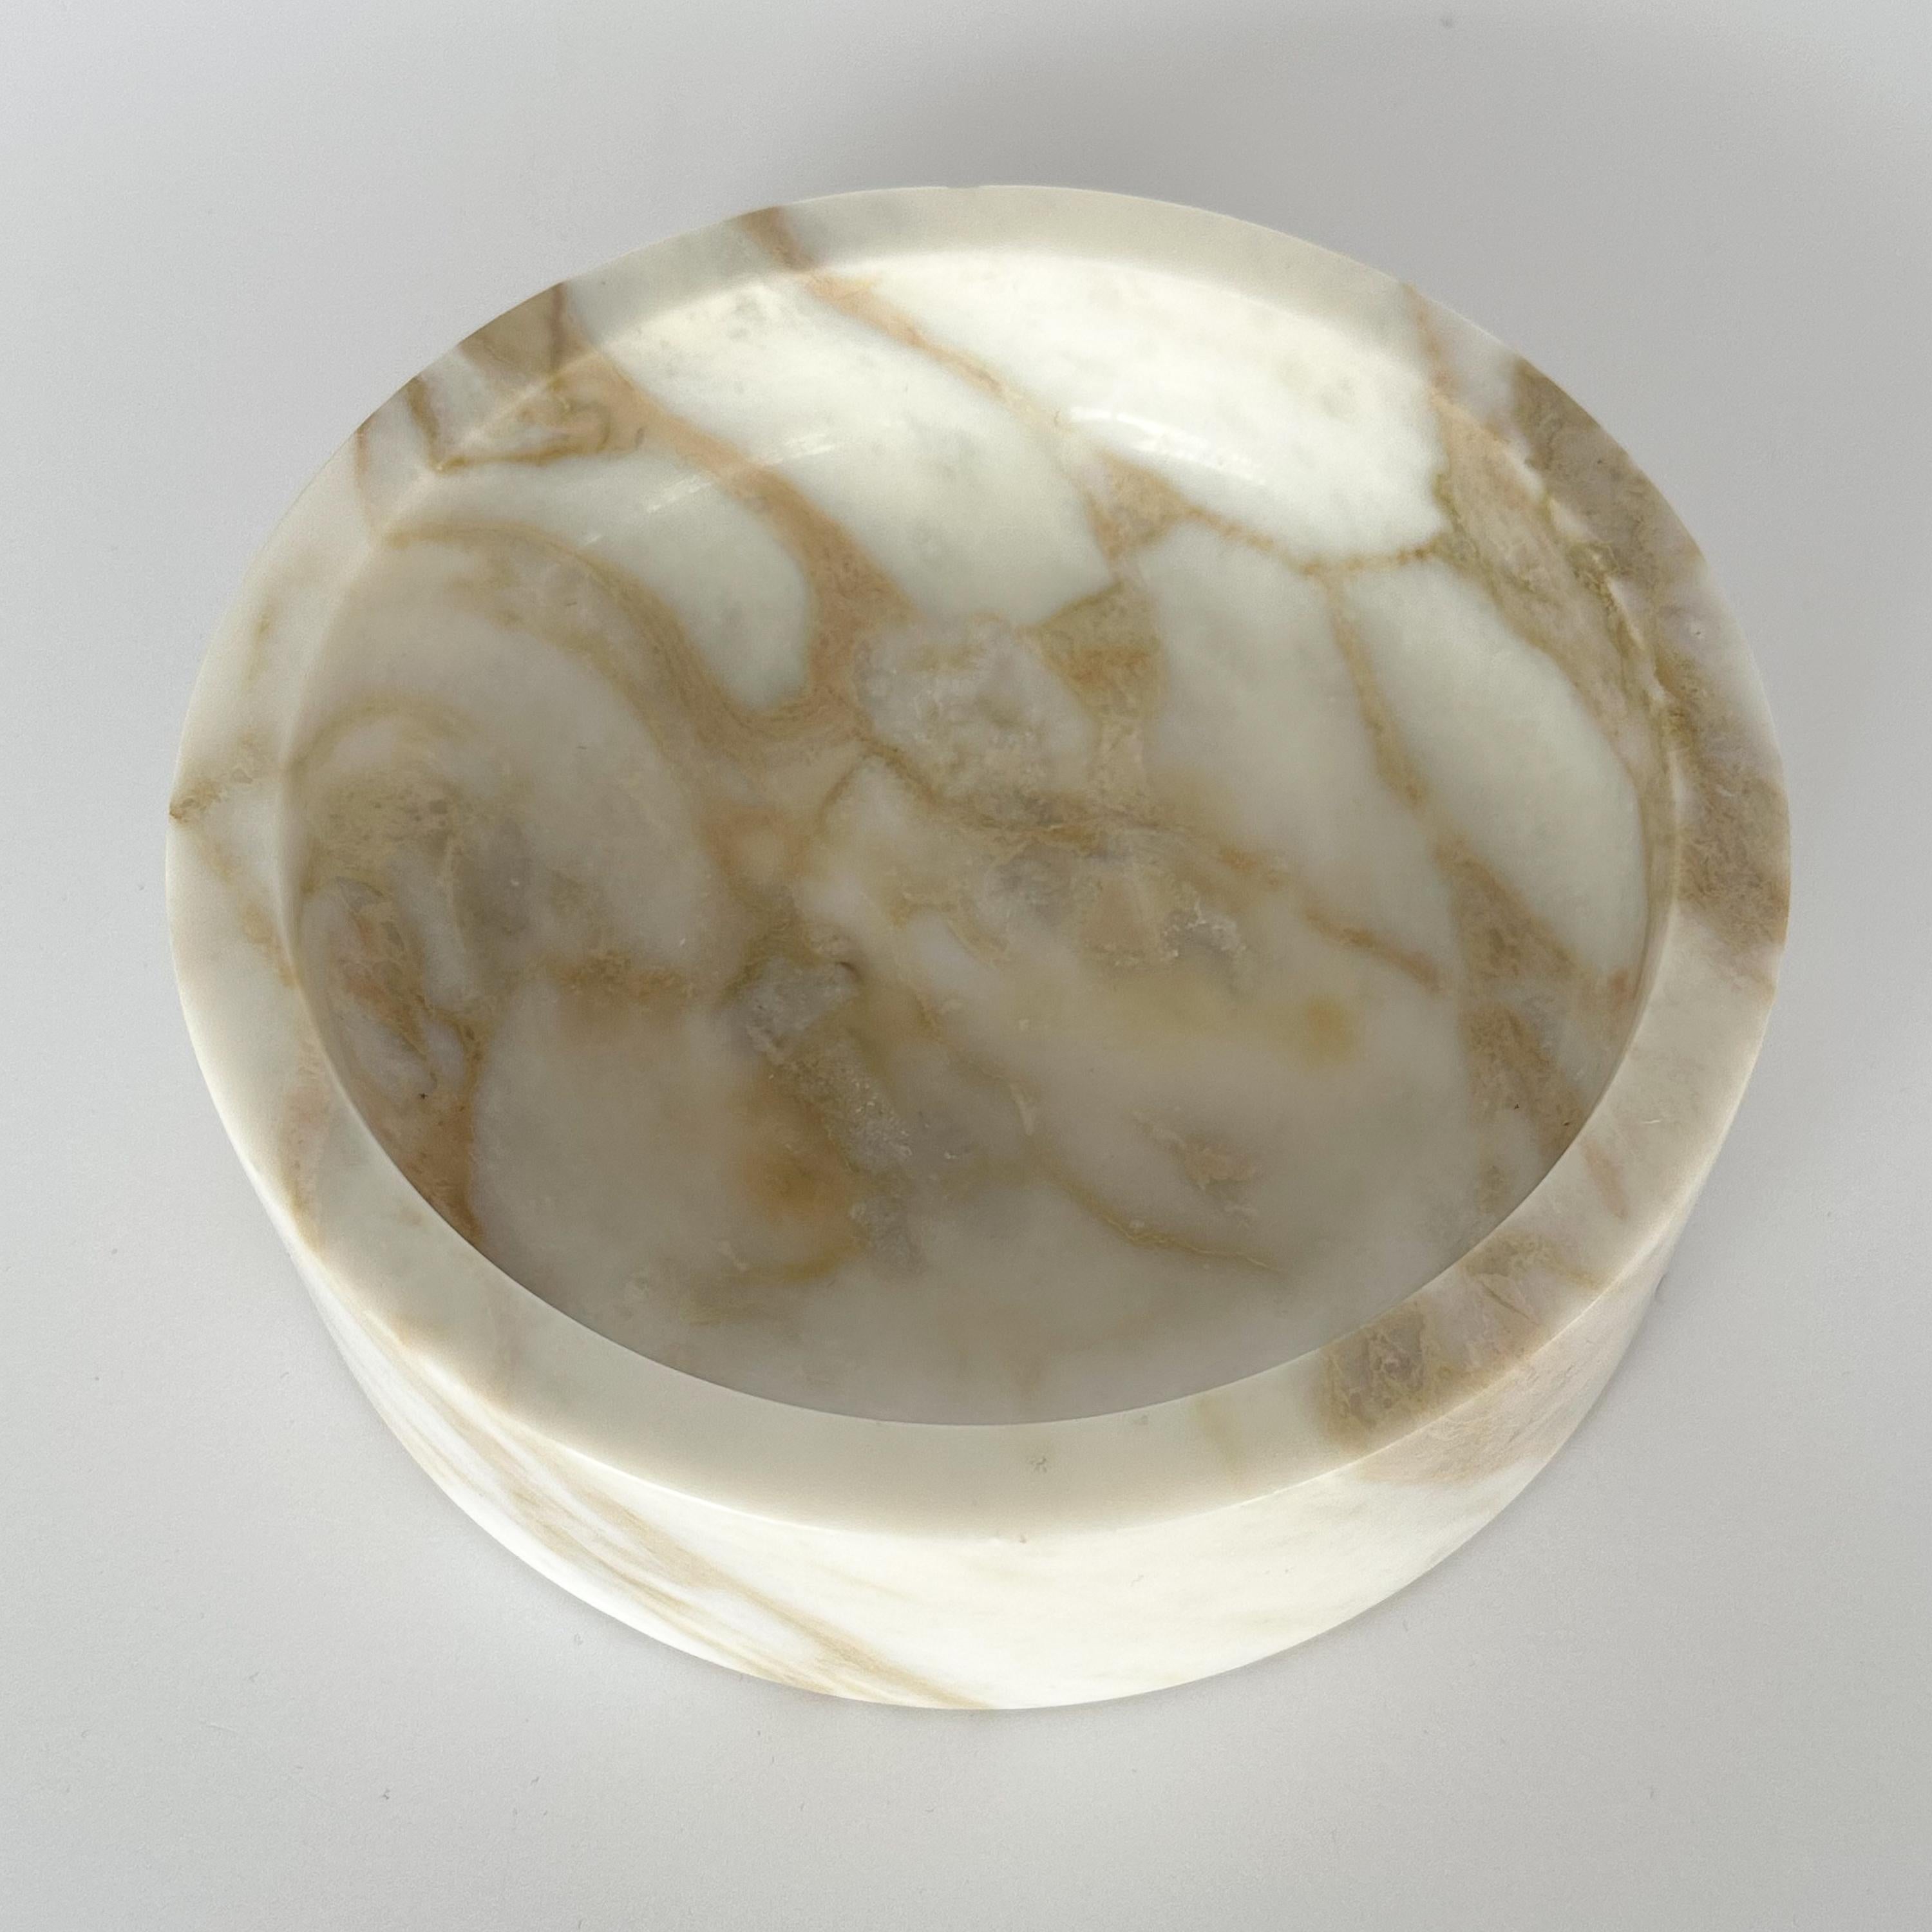 Angelo Mangiarotti style white marble modern bowl, Italy circa 1970s.  Solid carved Calcutta Gold marble (off white marble with tan and grey veining).  Unmarked.  Measures:  6.5